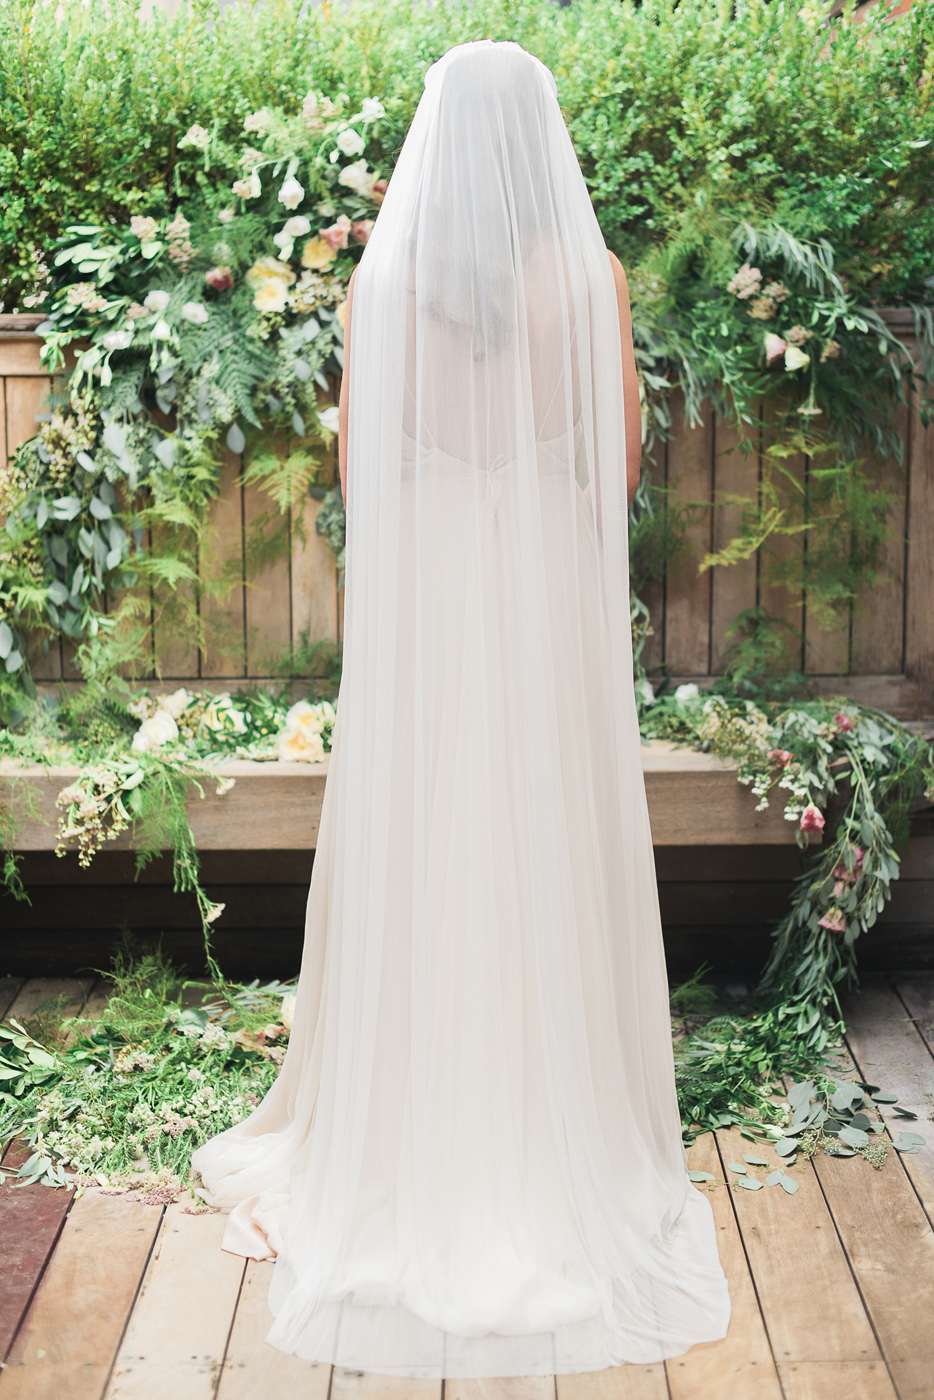 silk tulle veil back detail by hushed commotion